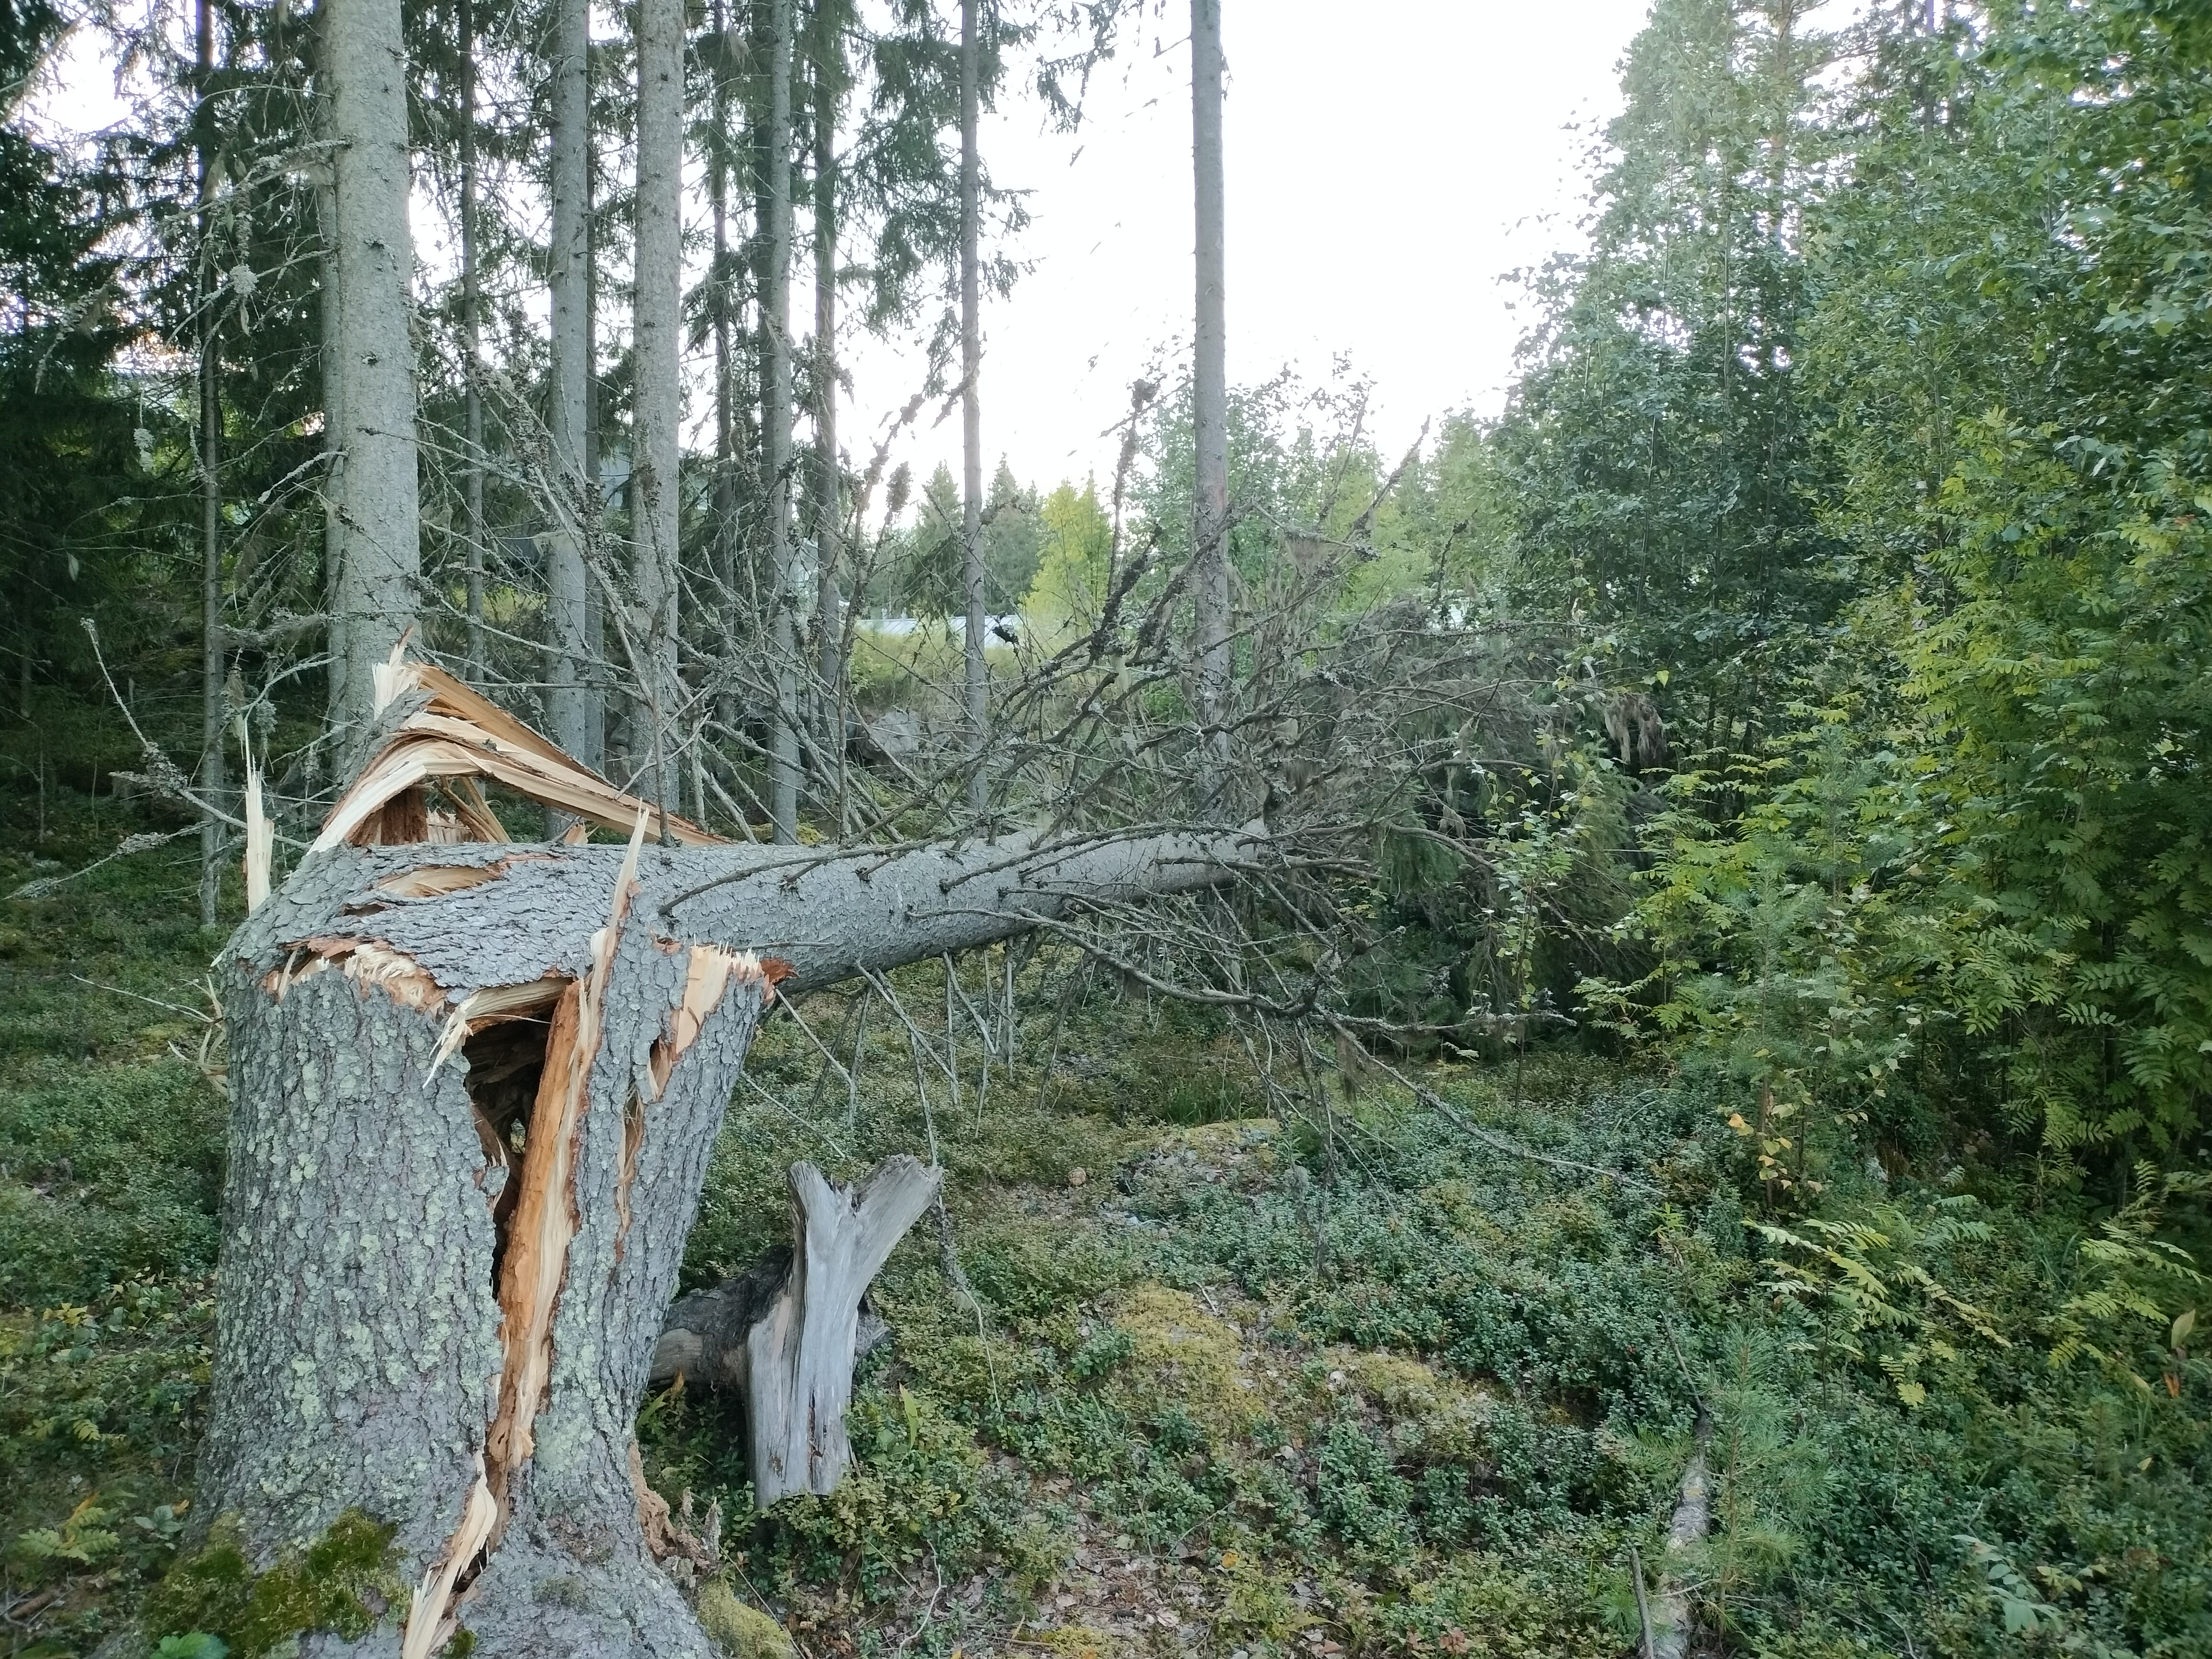 The storm is expected to bring dangerously strong winds to Finland